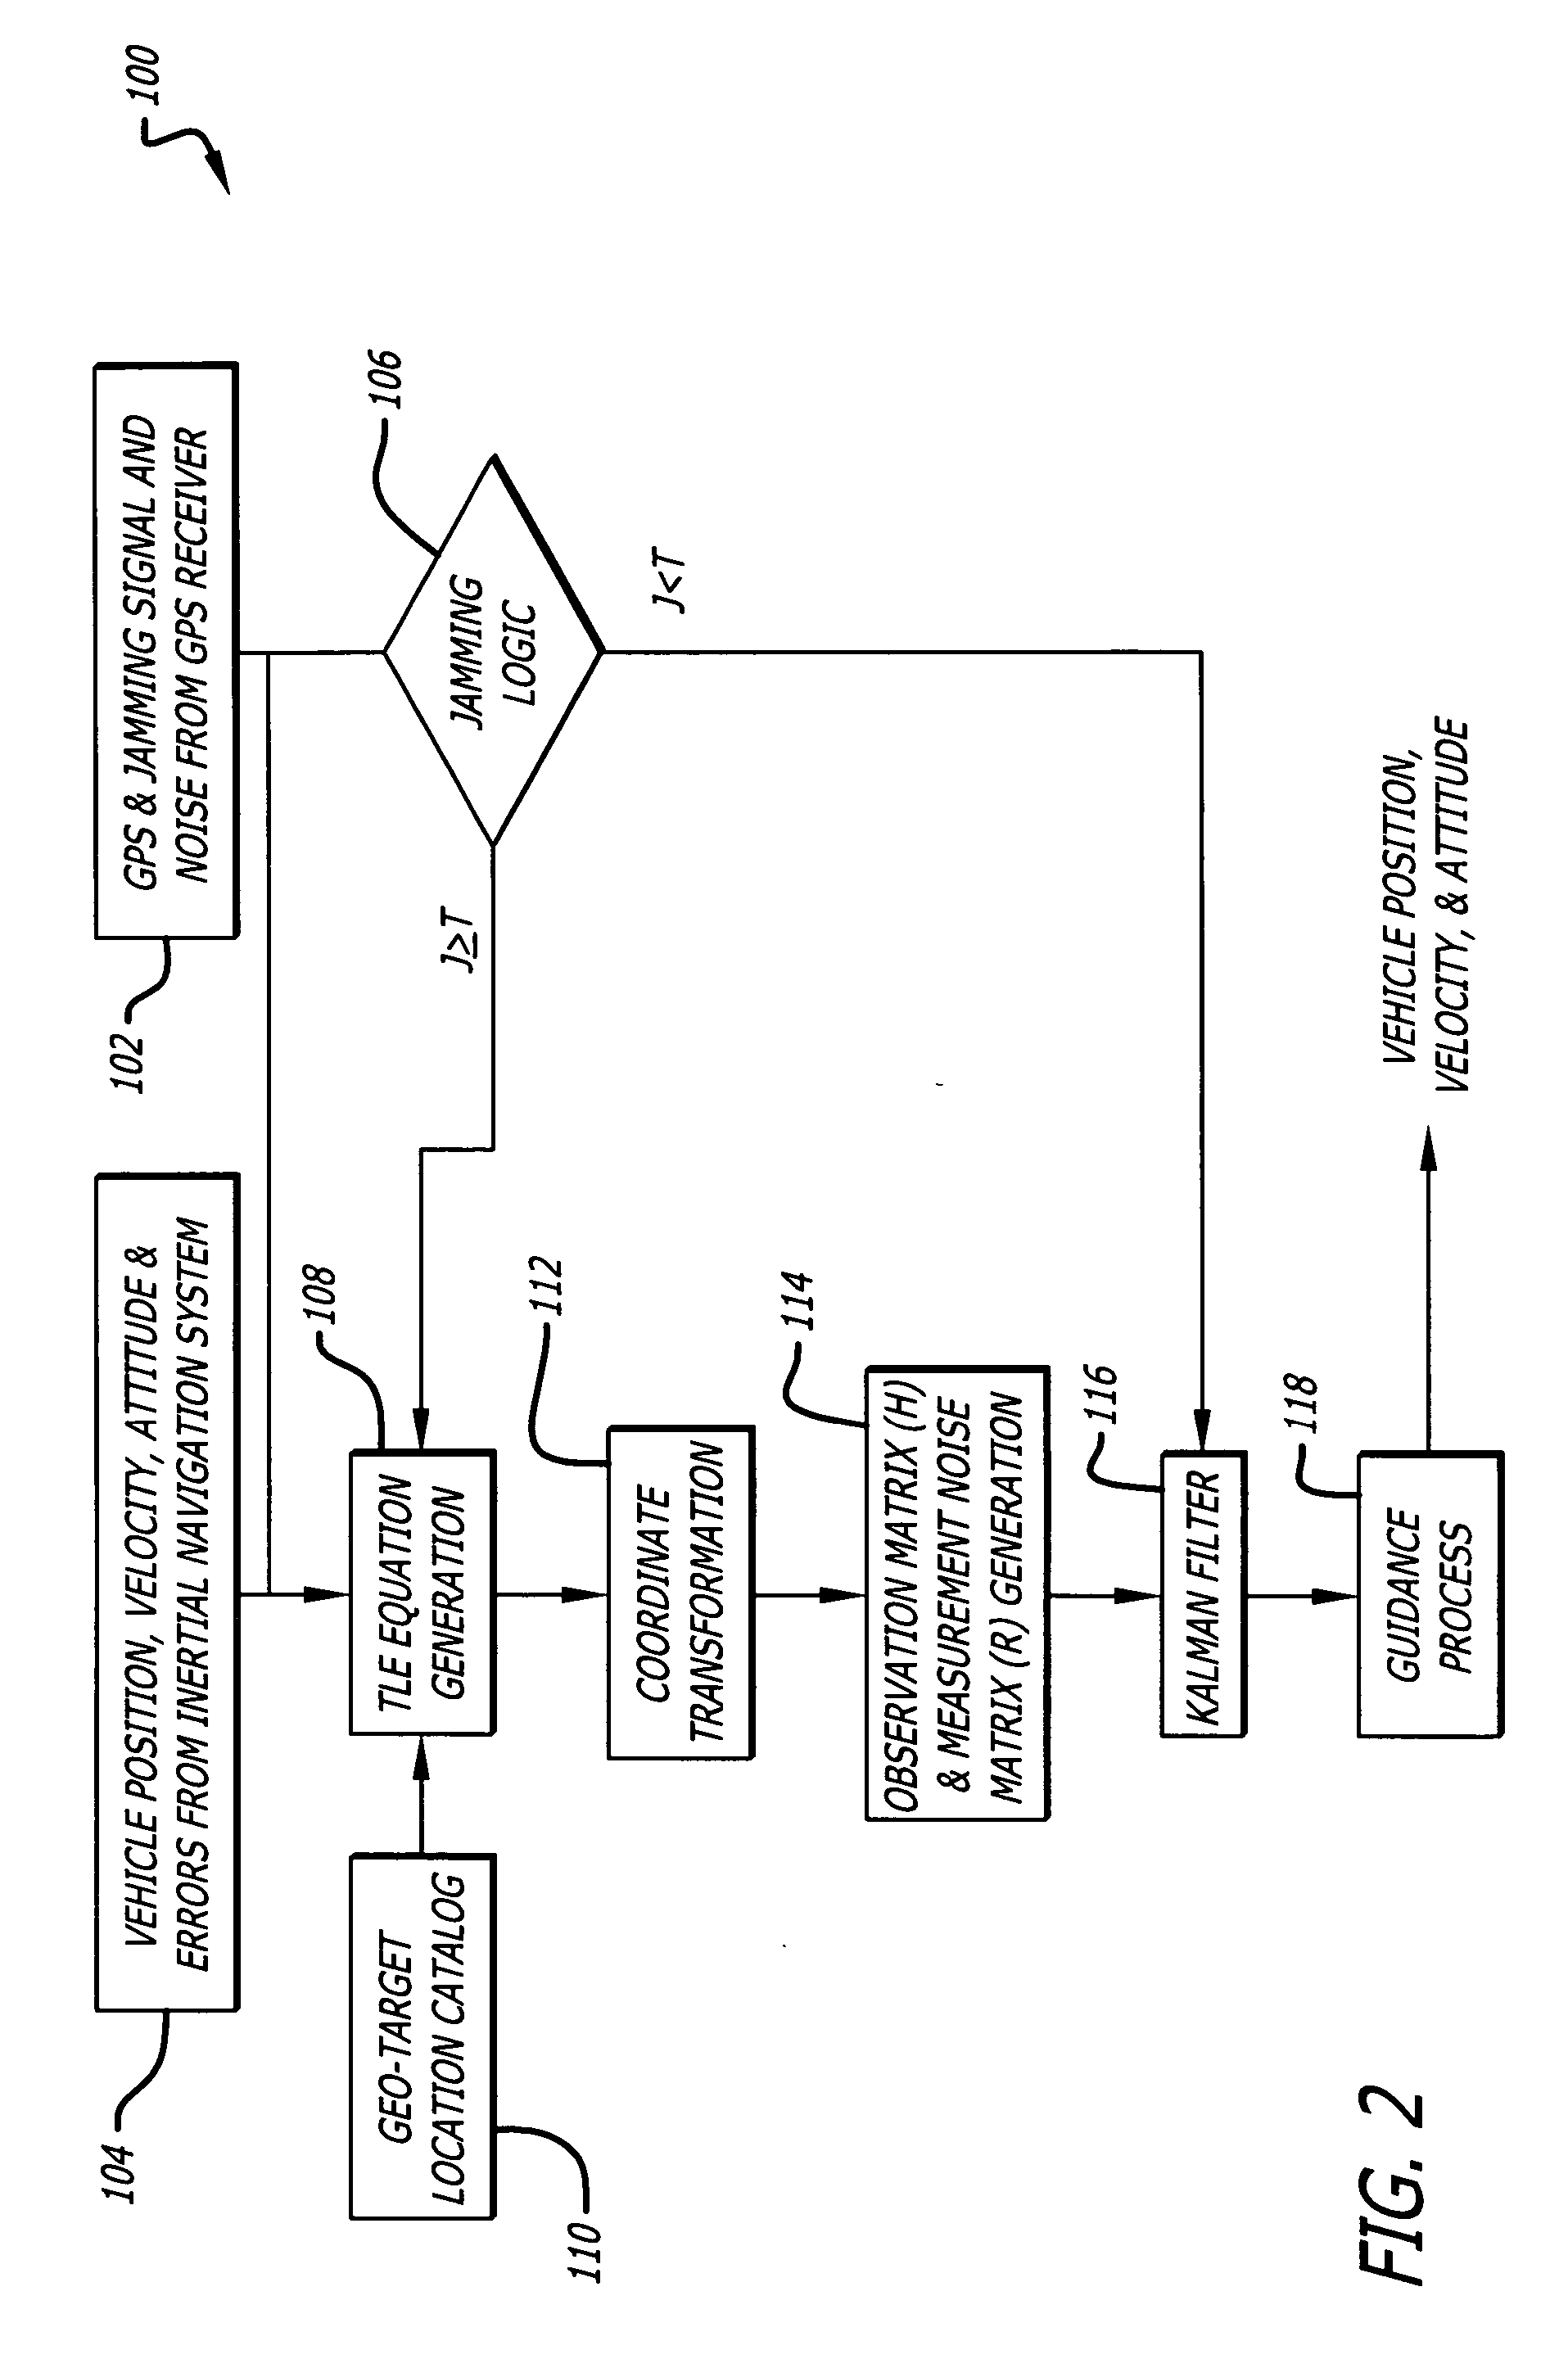 System and method for geo-registration with global positioning and inertial navigation